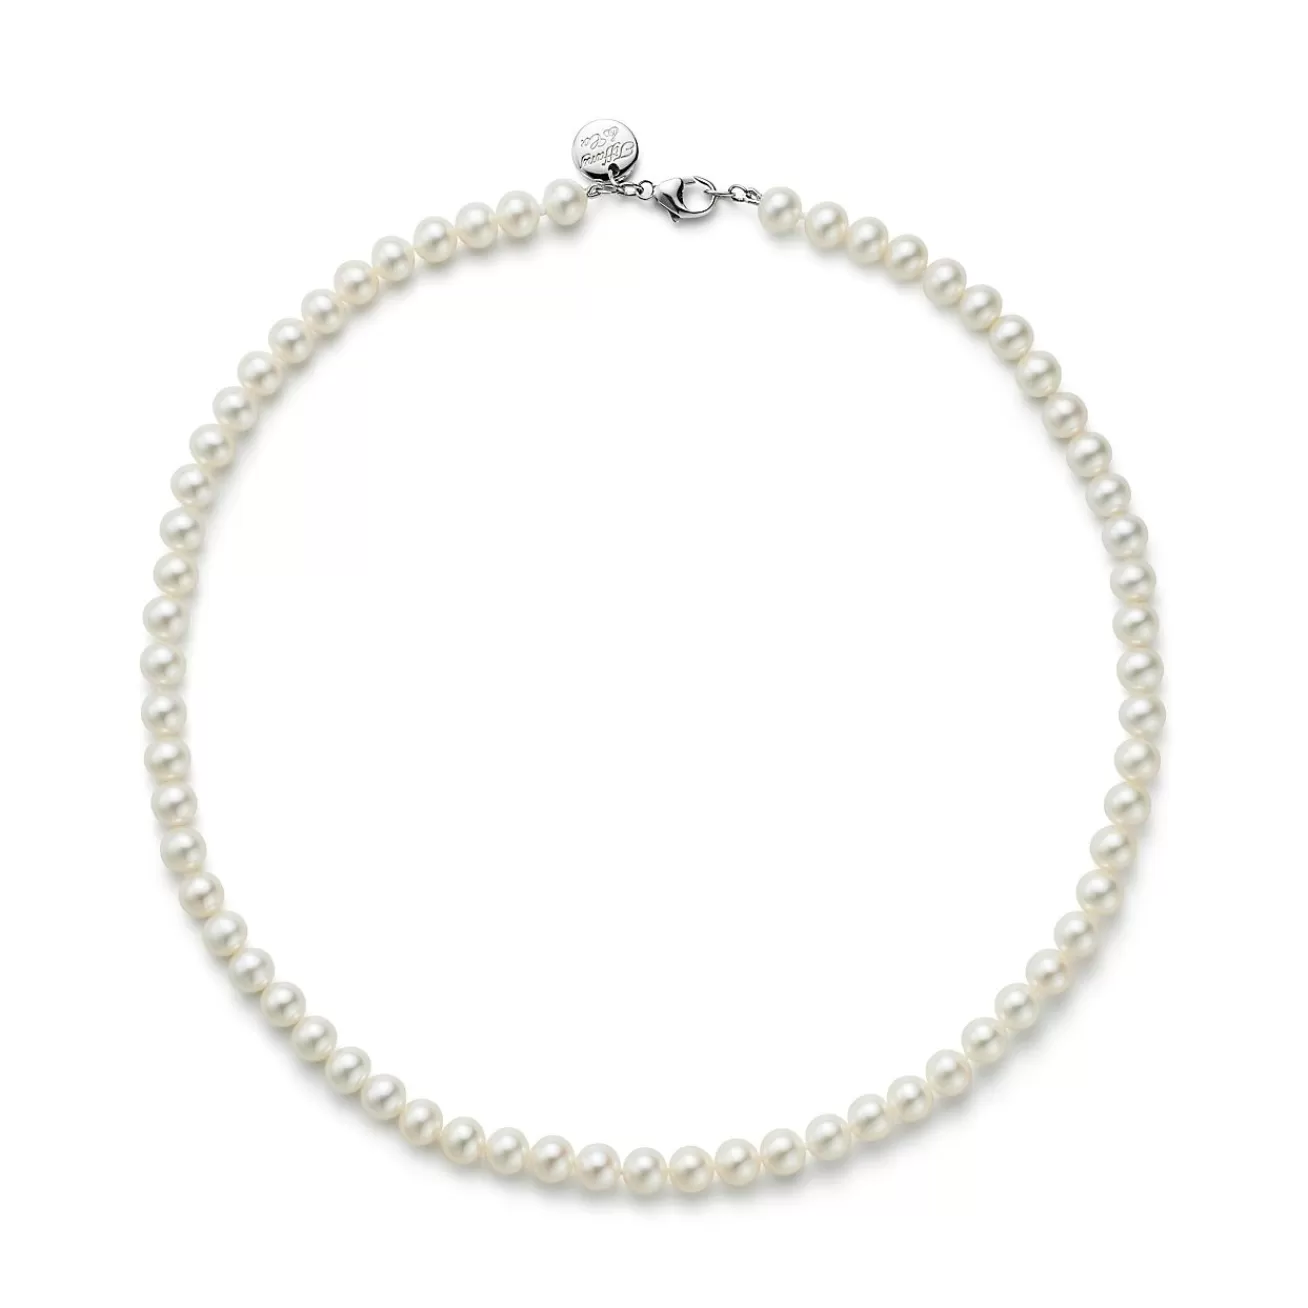 Tiffany & Co. Ziegfeld Collection Pearl Necklace with a Silver Clasp, 6-7 mm | ^ Necklaces & Pendants | Sterling Silver Jewelry